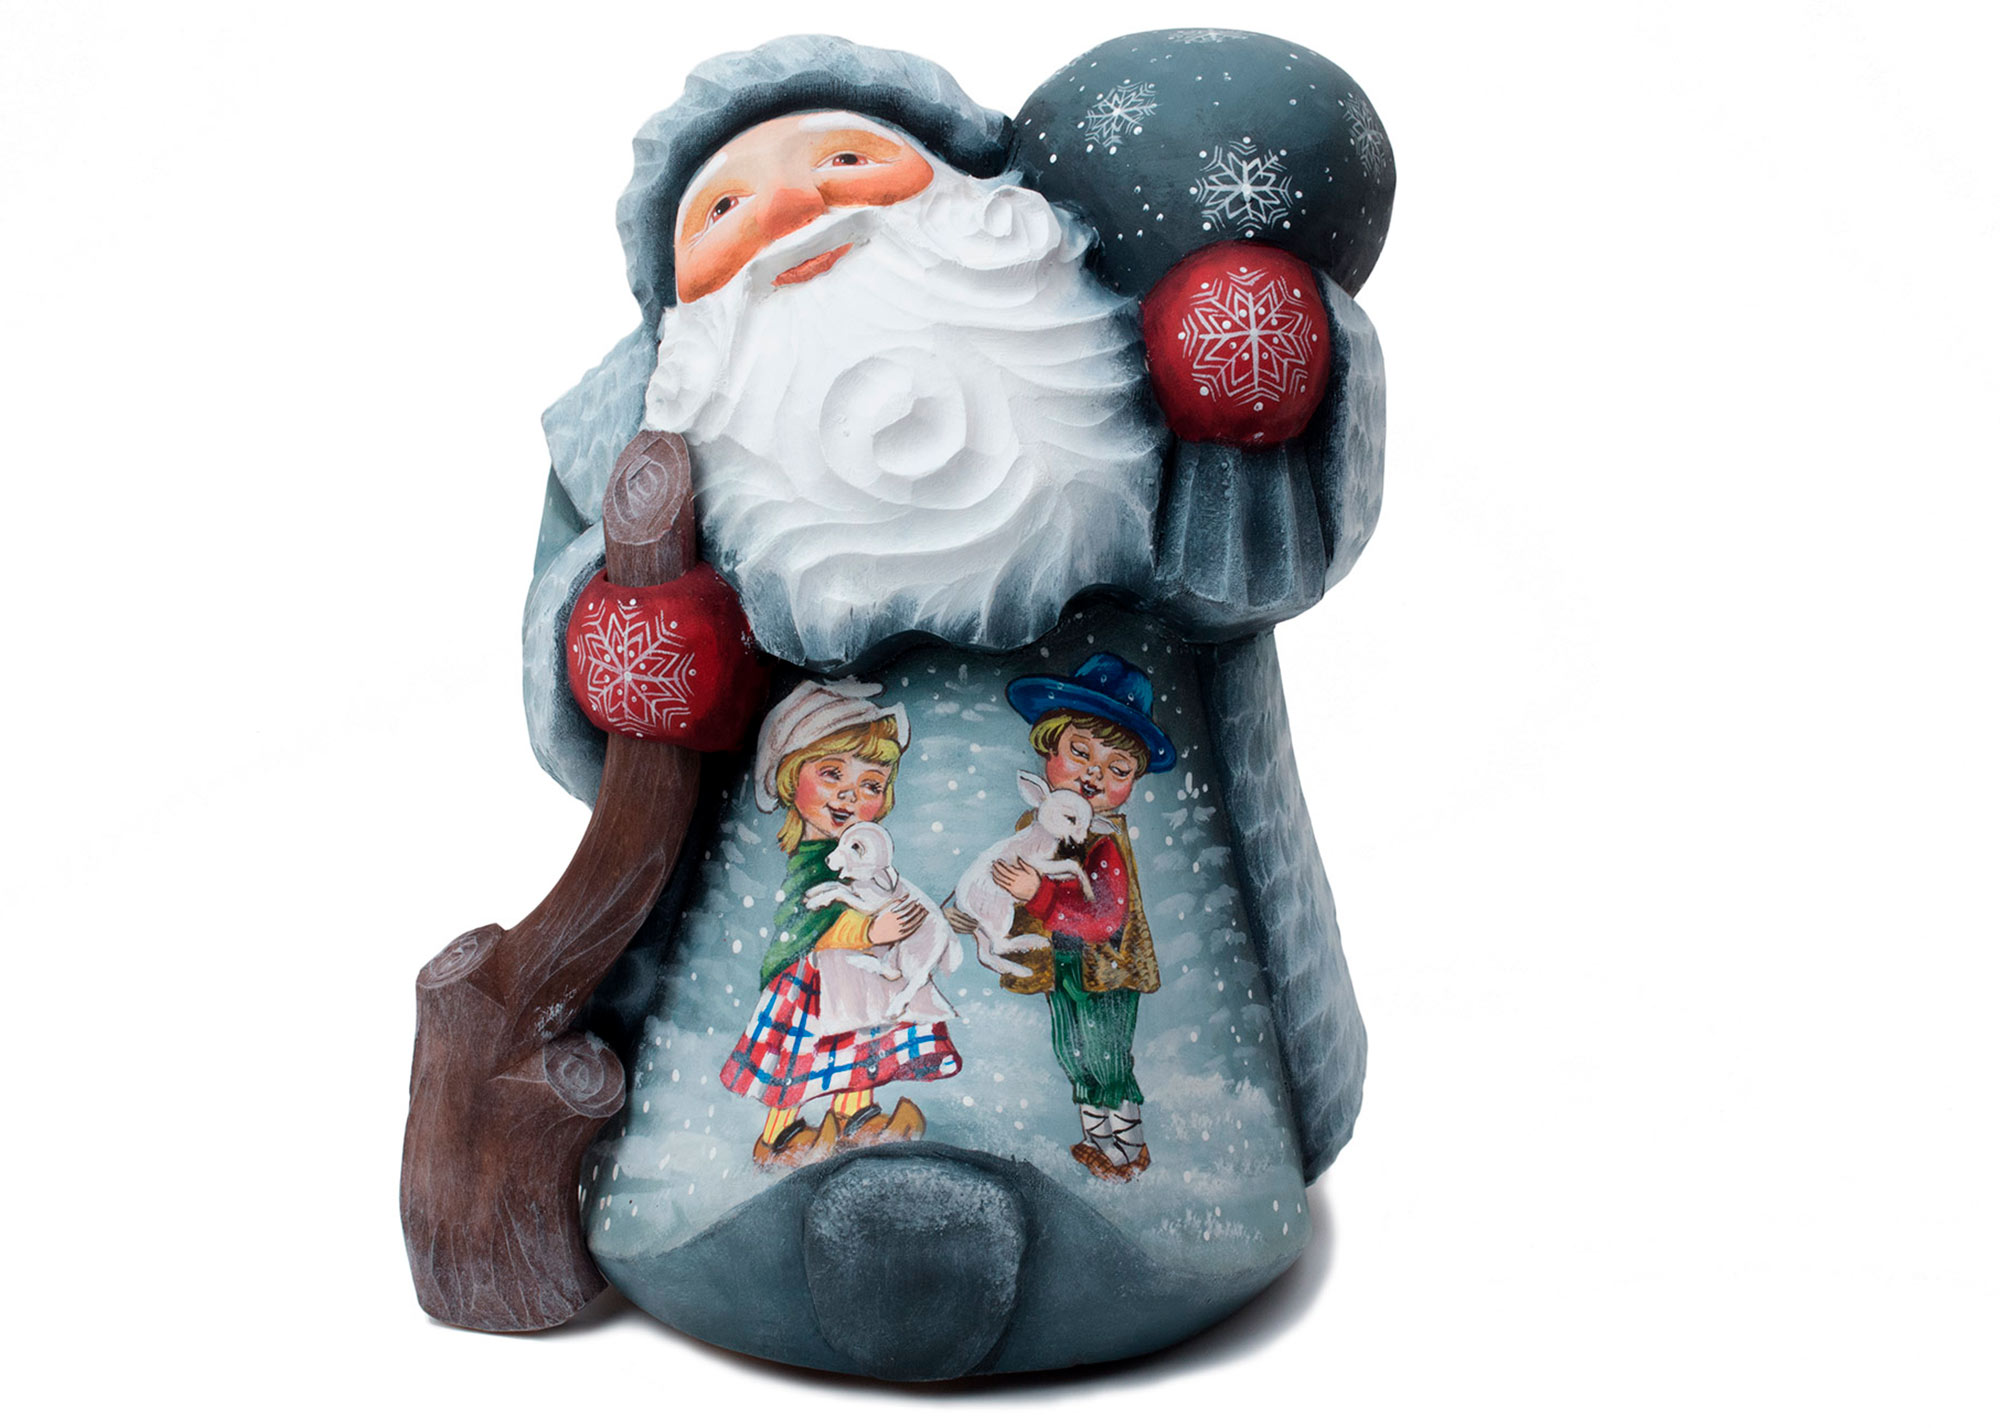 Buy Winter Jubilee Father Frost Carving at GoldenCockerel.com